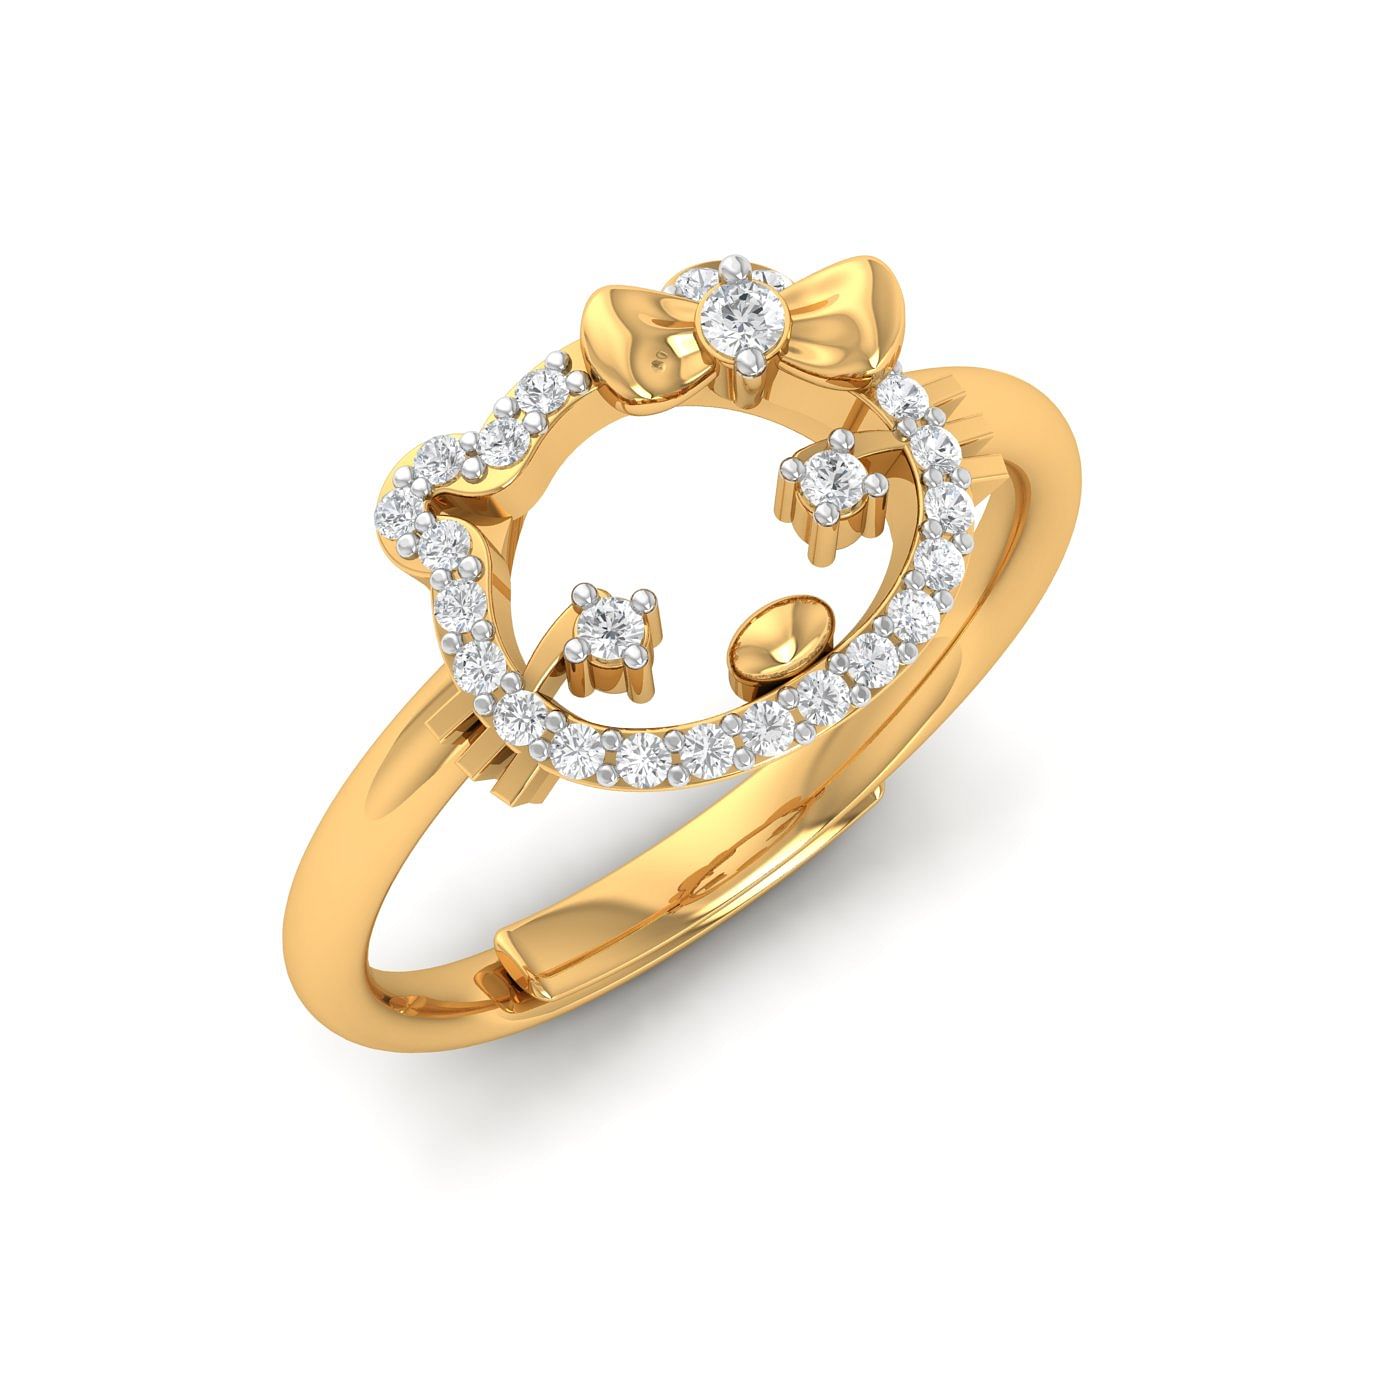 Stylish Modern Fancy Classic Diamond Ring With Yellow Gold For Gift